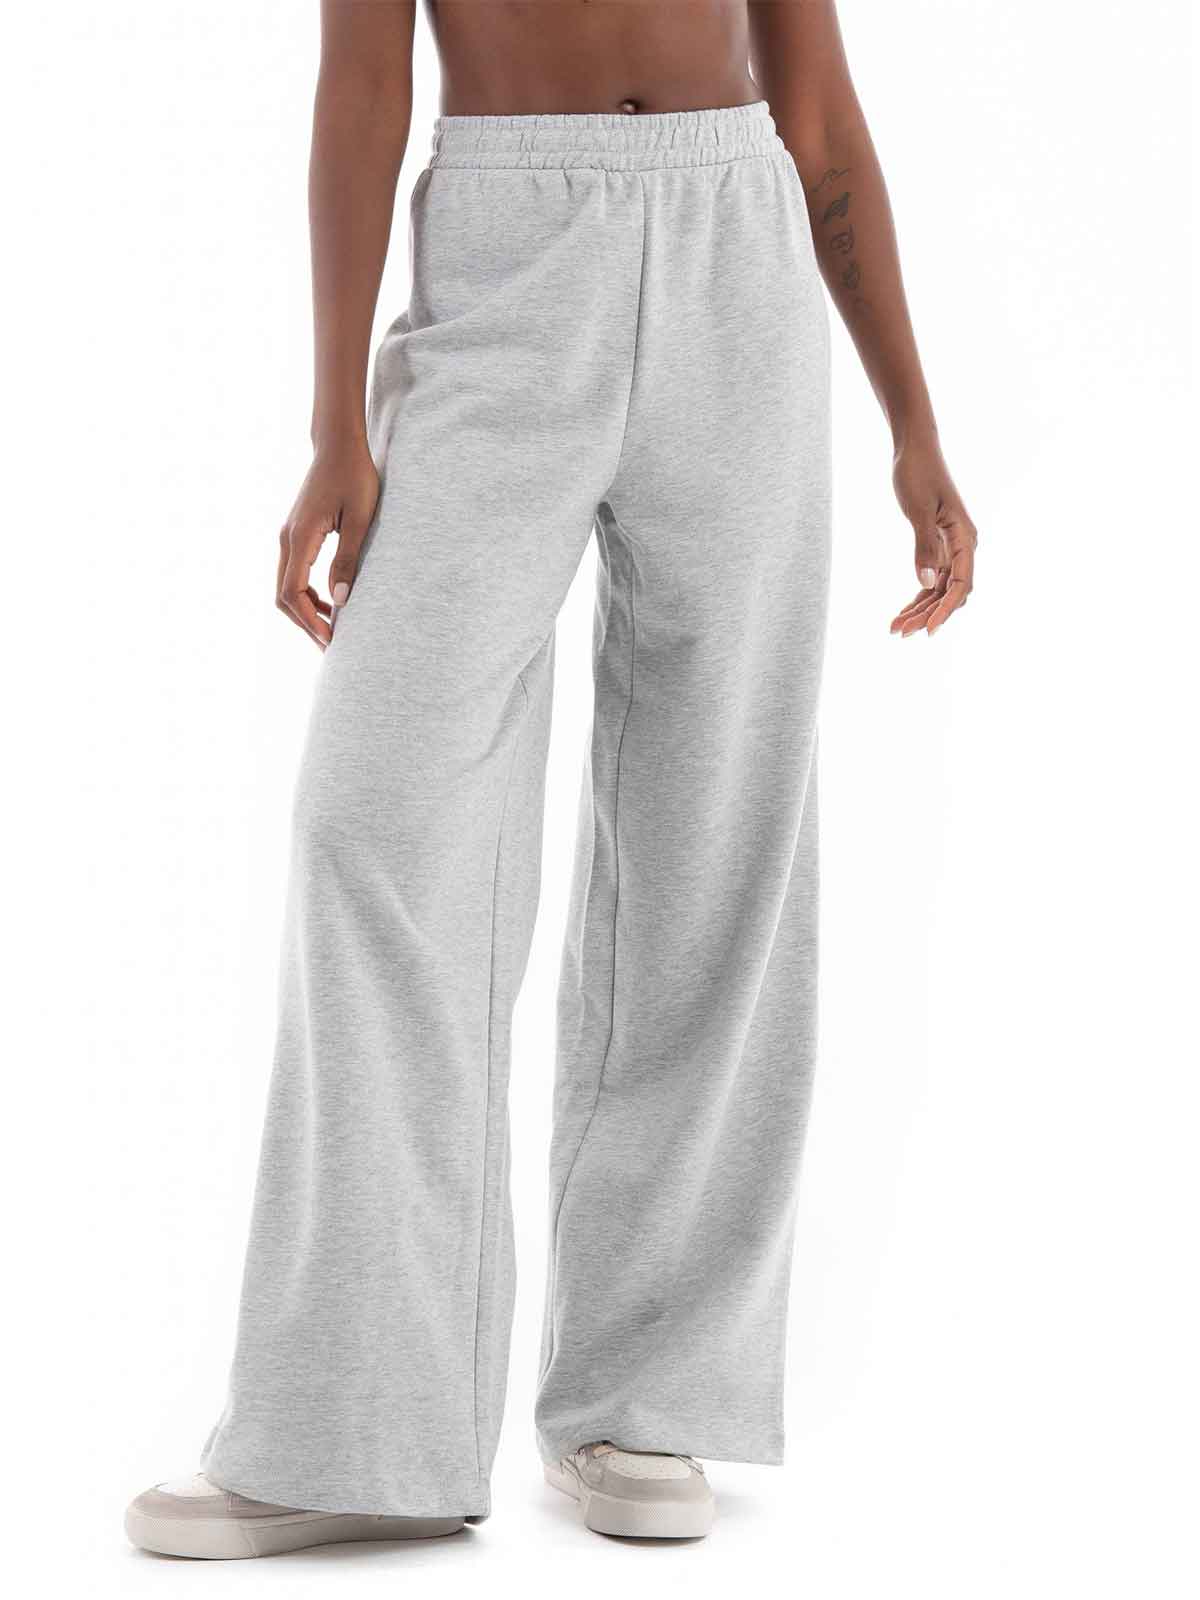   Only | Julia Superwide Shine Pant |  